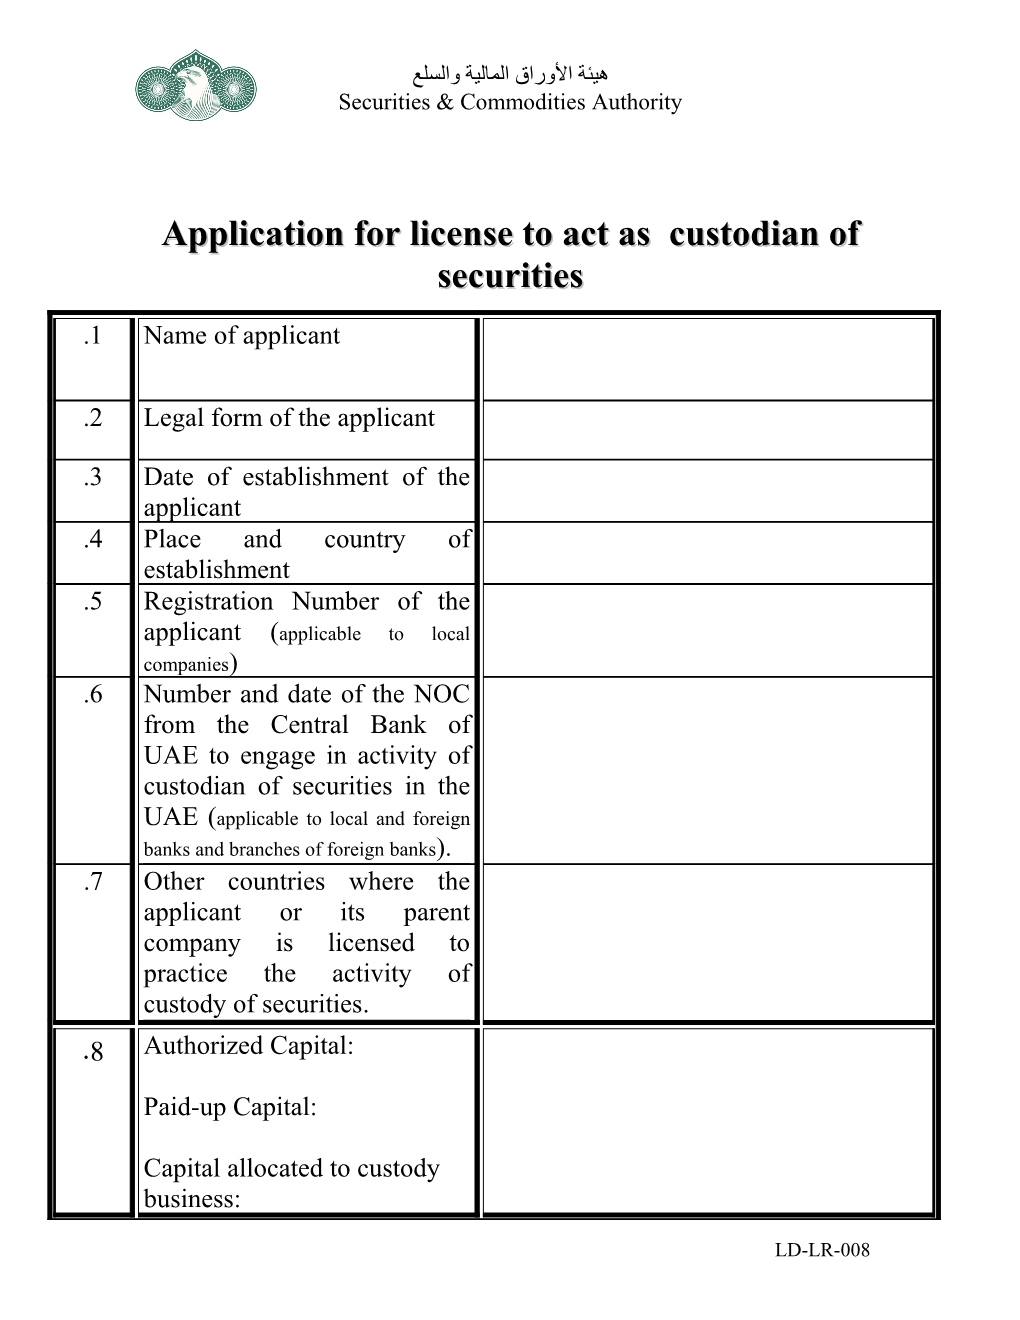 Application for License to Act As Custodian of Securities